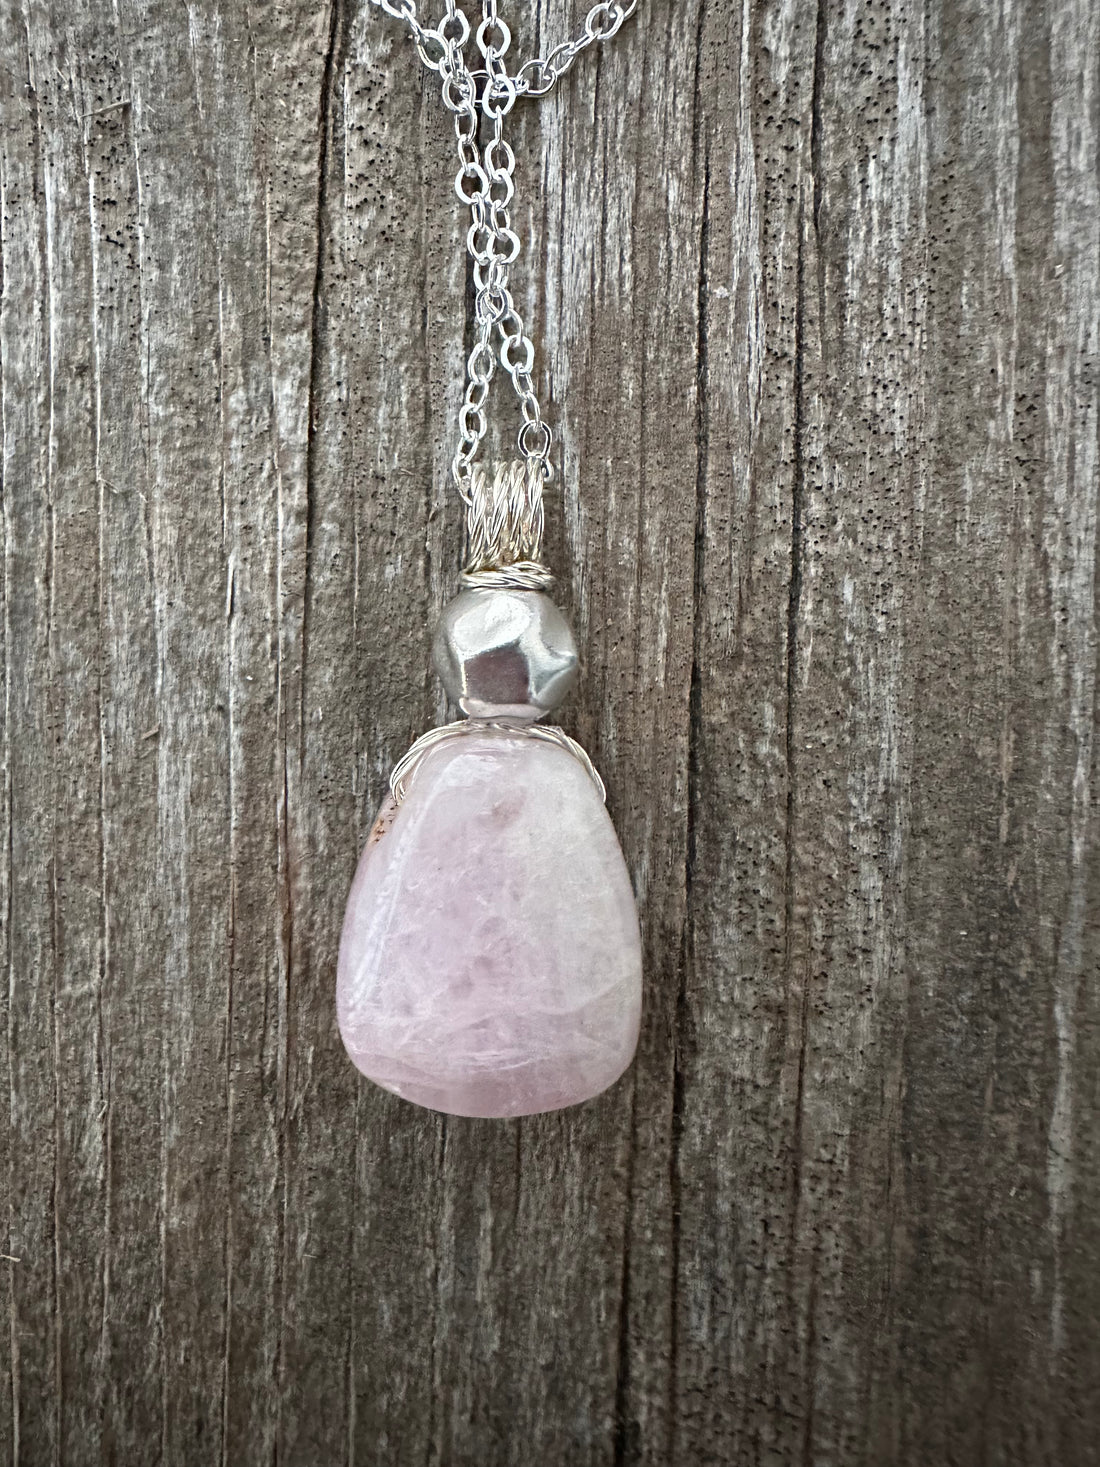 Kunzite for Protection, Intuition and Heart Awareness.